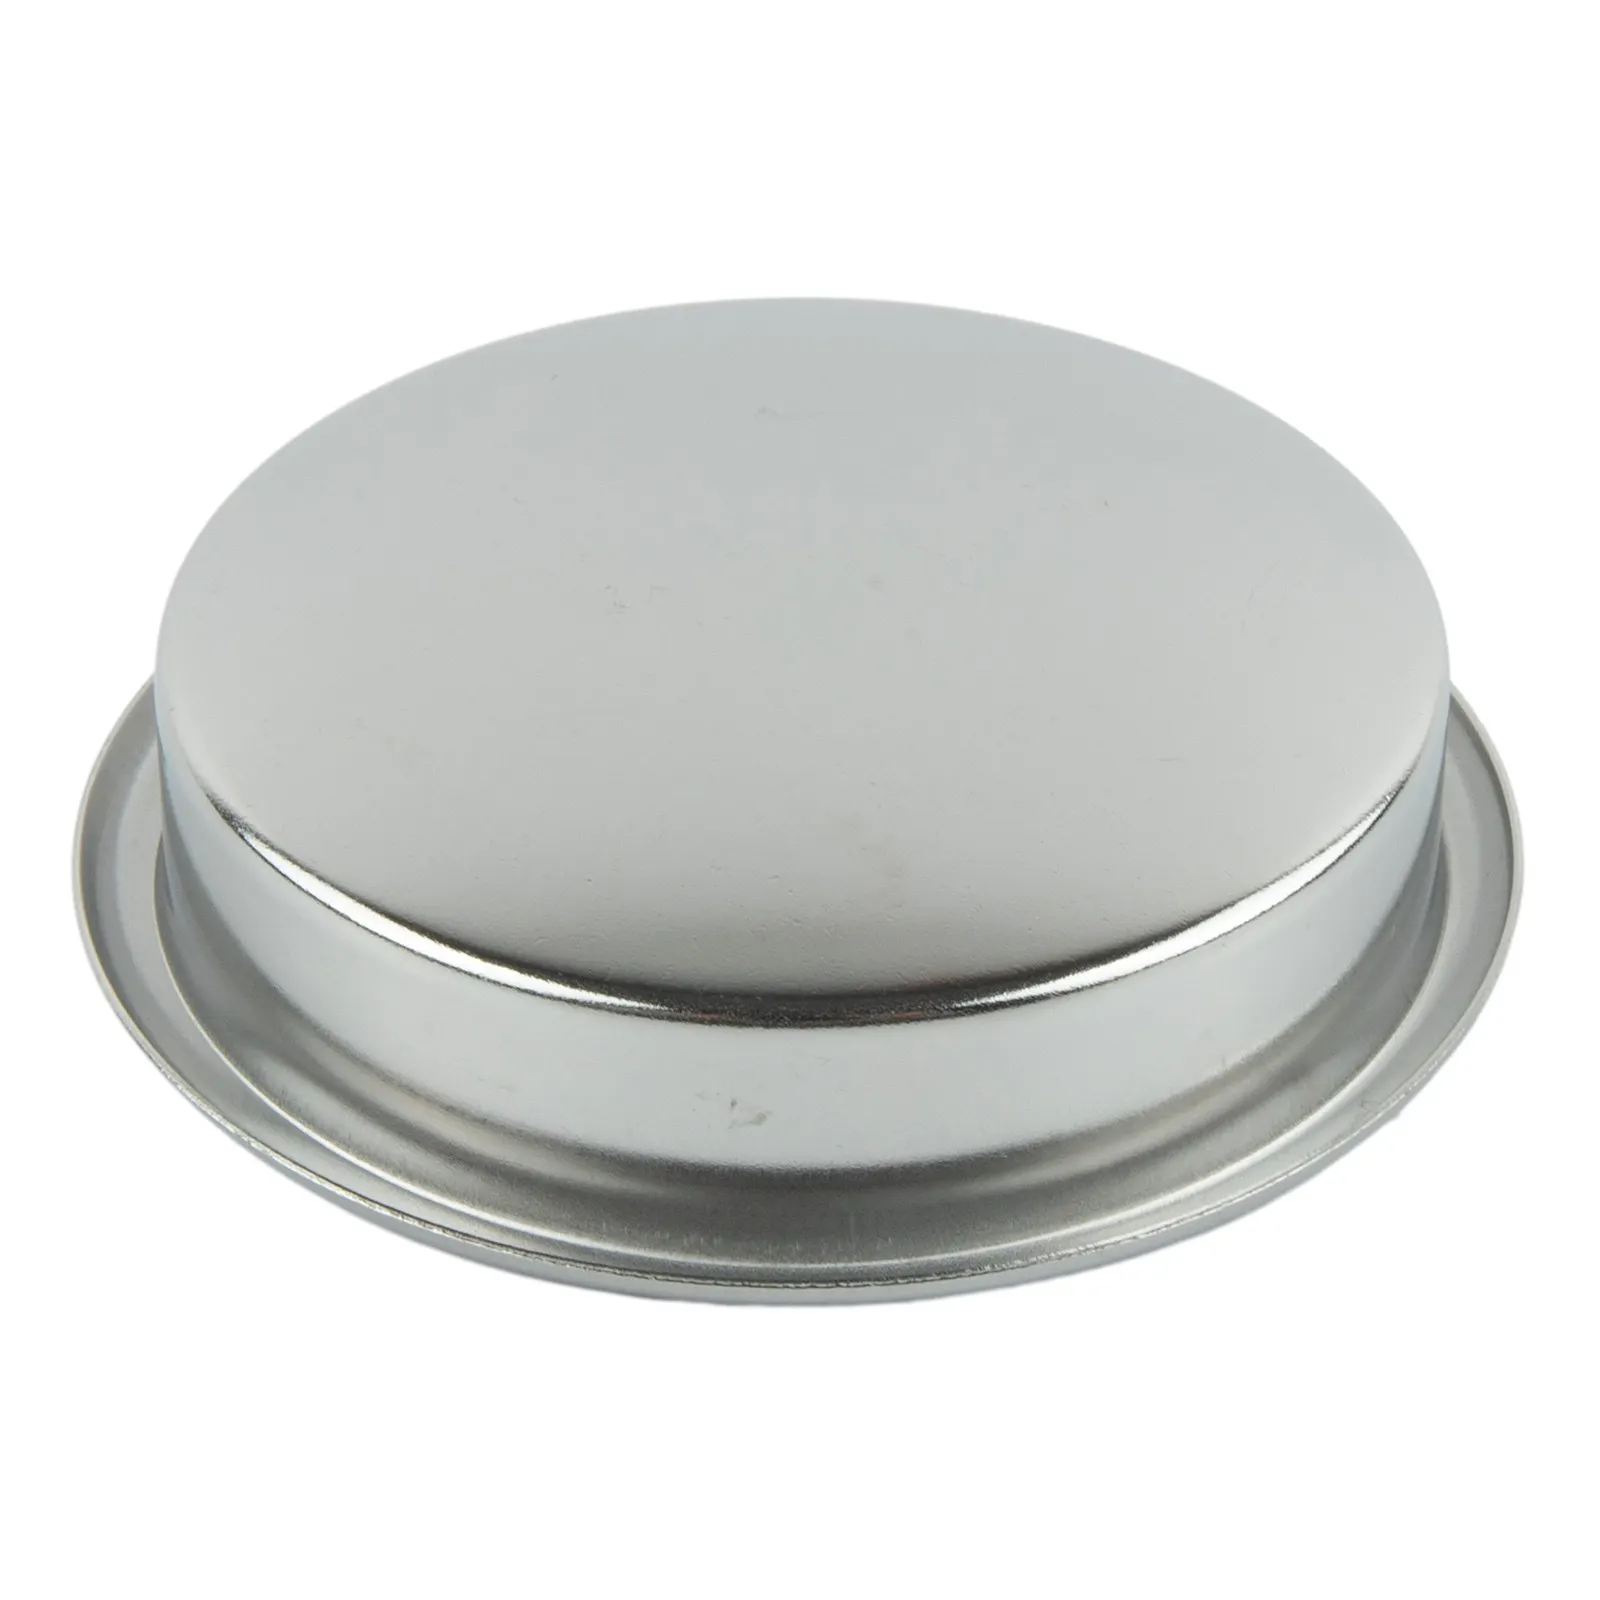 

Kitchen Tool Filter Bowl Accessories Gadgets Stainless Steel 1pc Dia 58mm Height 17mm Non-Porous Parts Durable